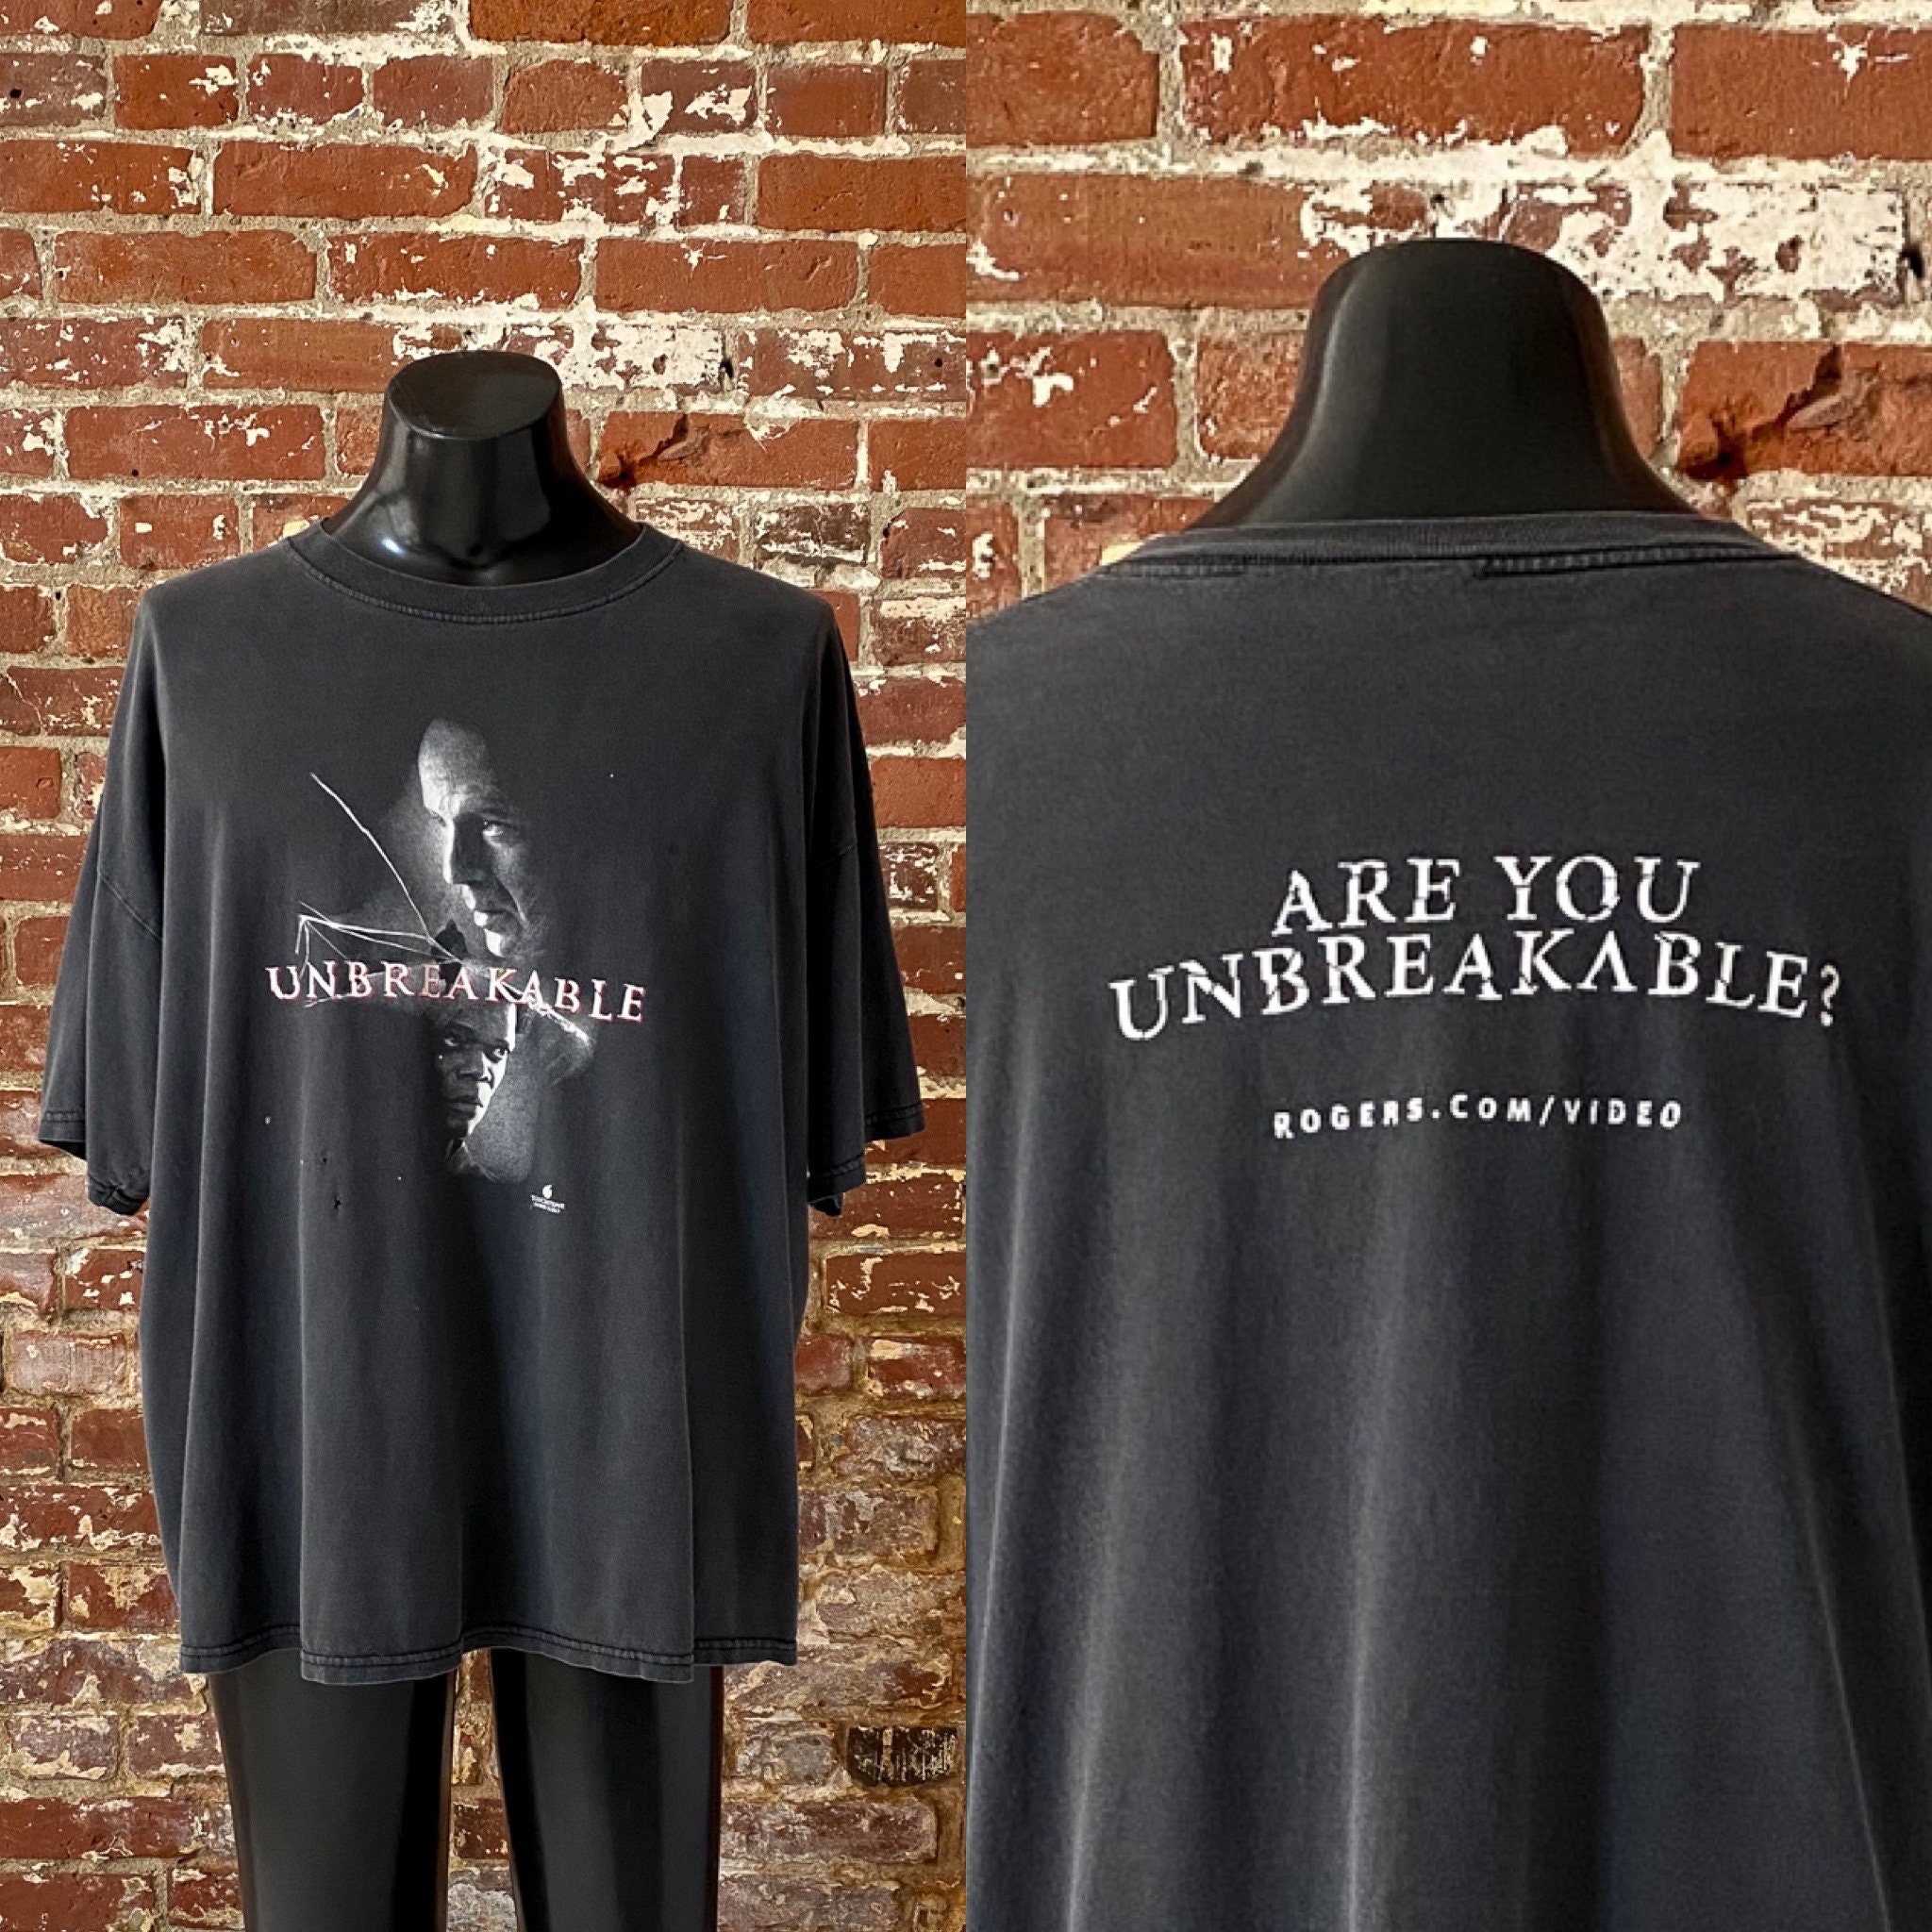 00s Unbreakable Movie Promo T-Shirt. Year 2000 Unbreakable - Etsy 日本